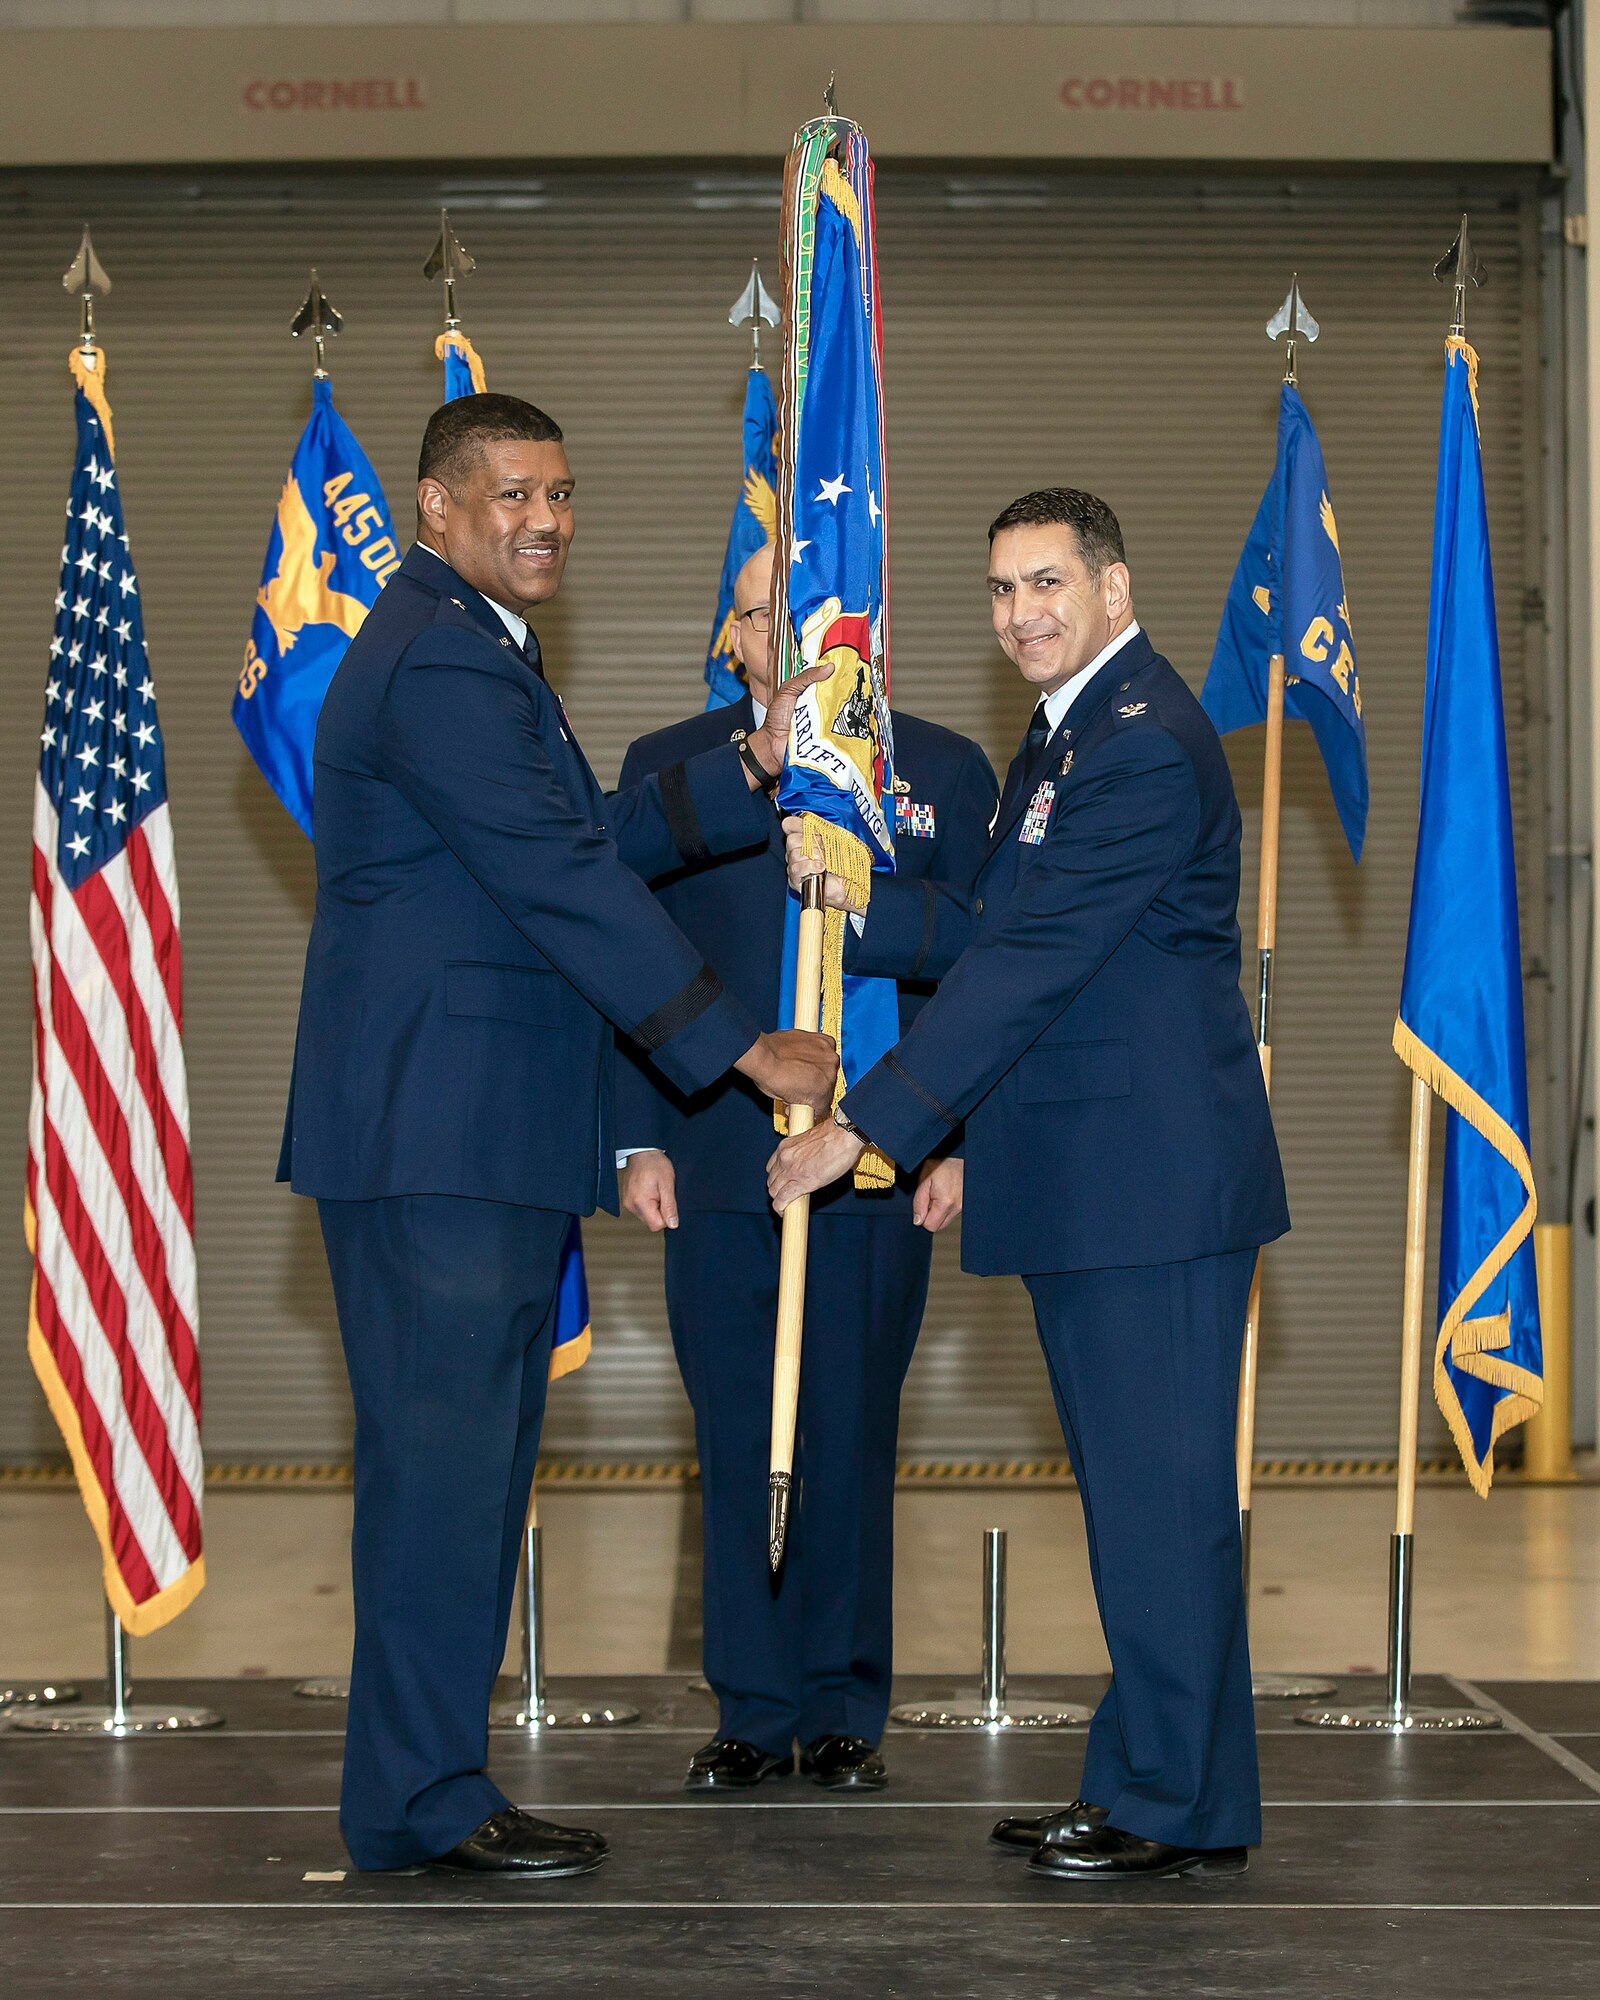 The 445th Airlift Wing held an assumption of command ceremony here as Col. Raymond Smith, Jr., took command of the wing during a ceremony Jan. 4, 2020. Brig. Gen. Robert Blake, mobilization assistant to the director of current operations, deputy chief of staff for operations, Headquarters U.S. Air Force, Washington D.C., presided over the ceremony. Col. Adam Willis, the previous 445th AW commander, left Dec. 7, 2019, to take command of the 315th Airlift Wing at Joint Base Charleston, South Carolina.